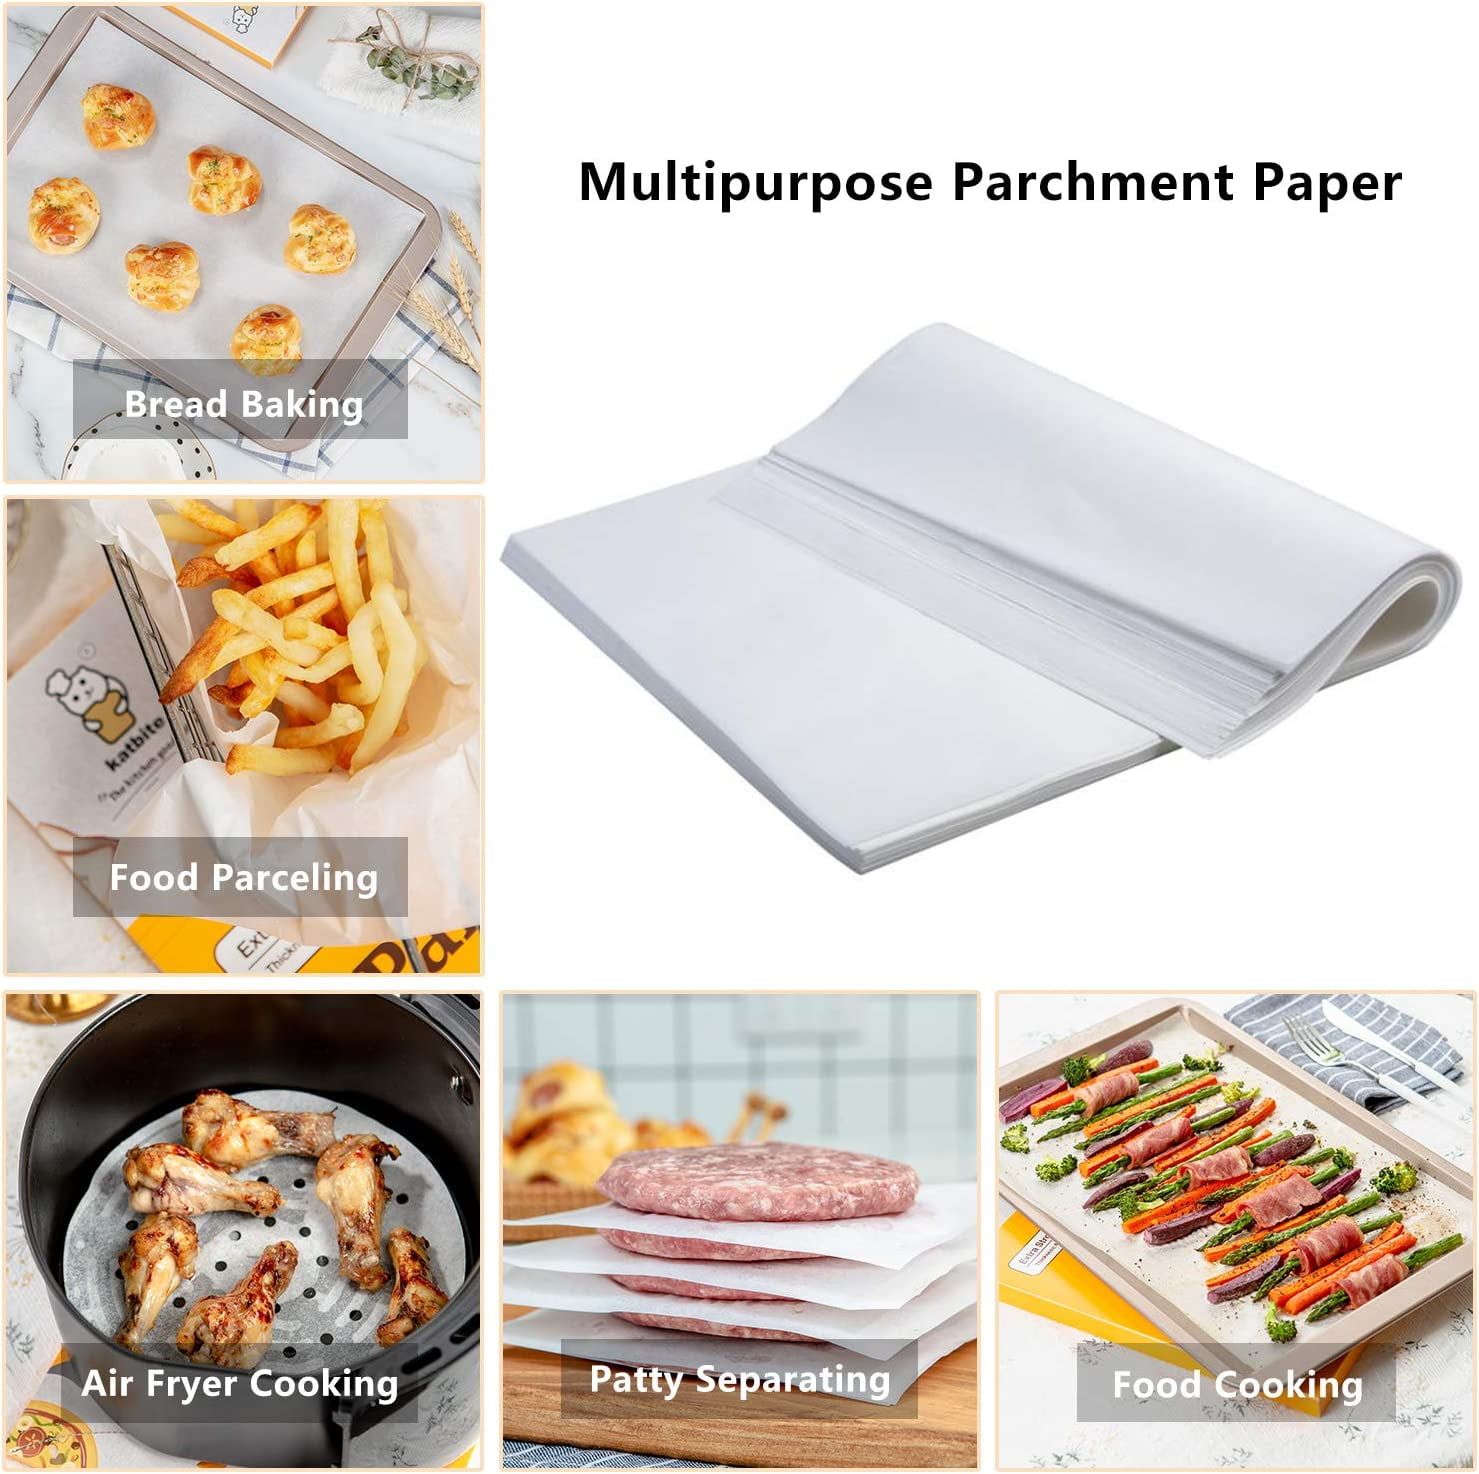 Heavy Duty Parchment Paper Sheets, Precut Parchment Paper for Quarter Sheet Pans Liners, Baking Cookies, Bread, Meat, Pizza, Toaster Oven, Size: 11.8